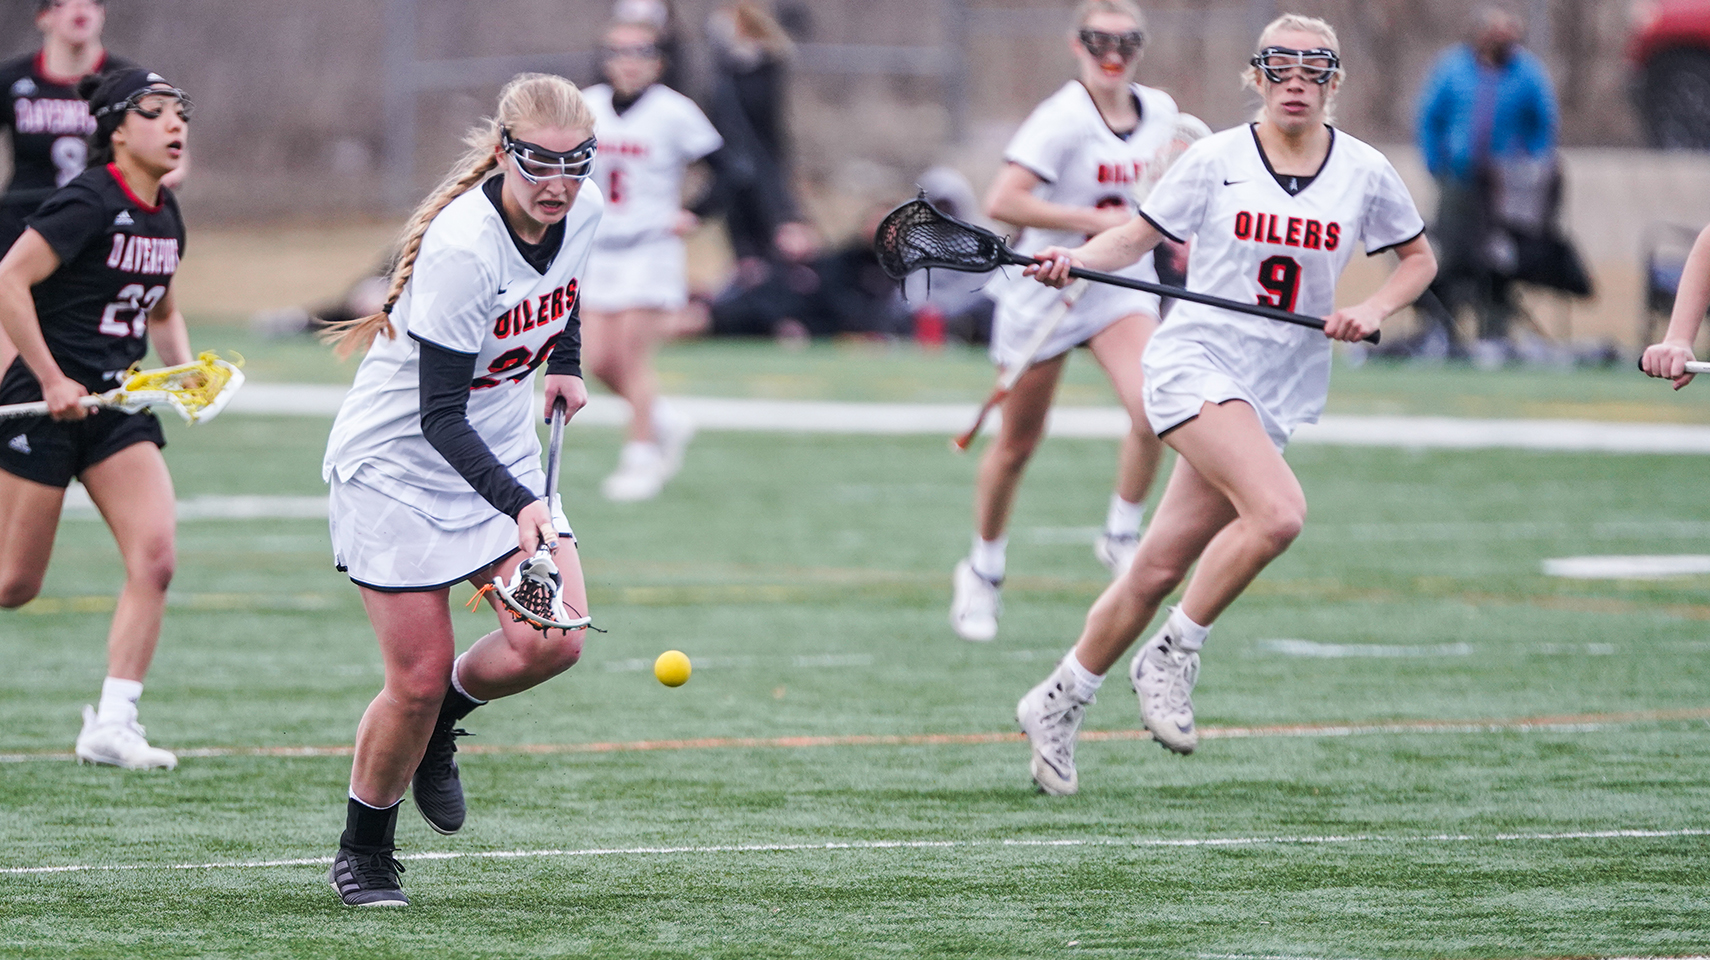 Women's lacrosse player picking up a ground ball